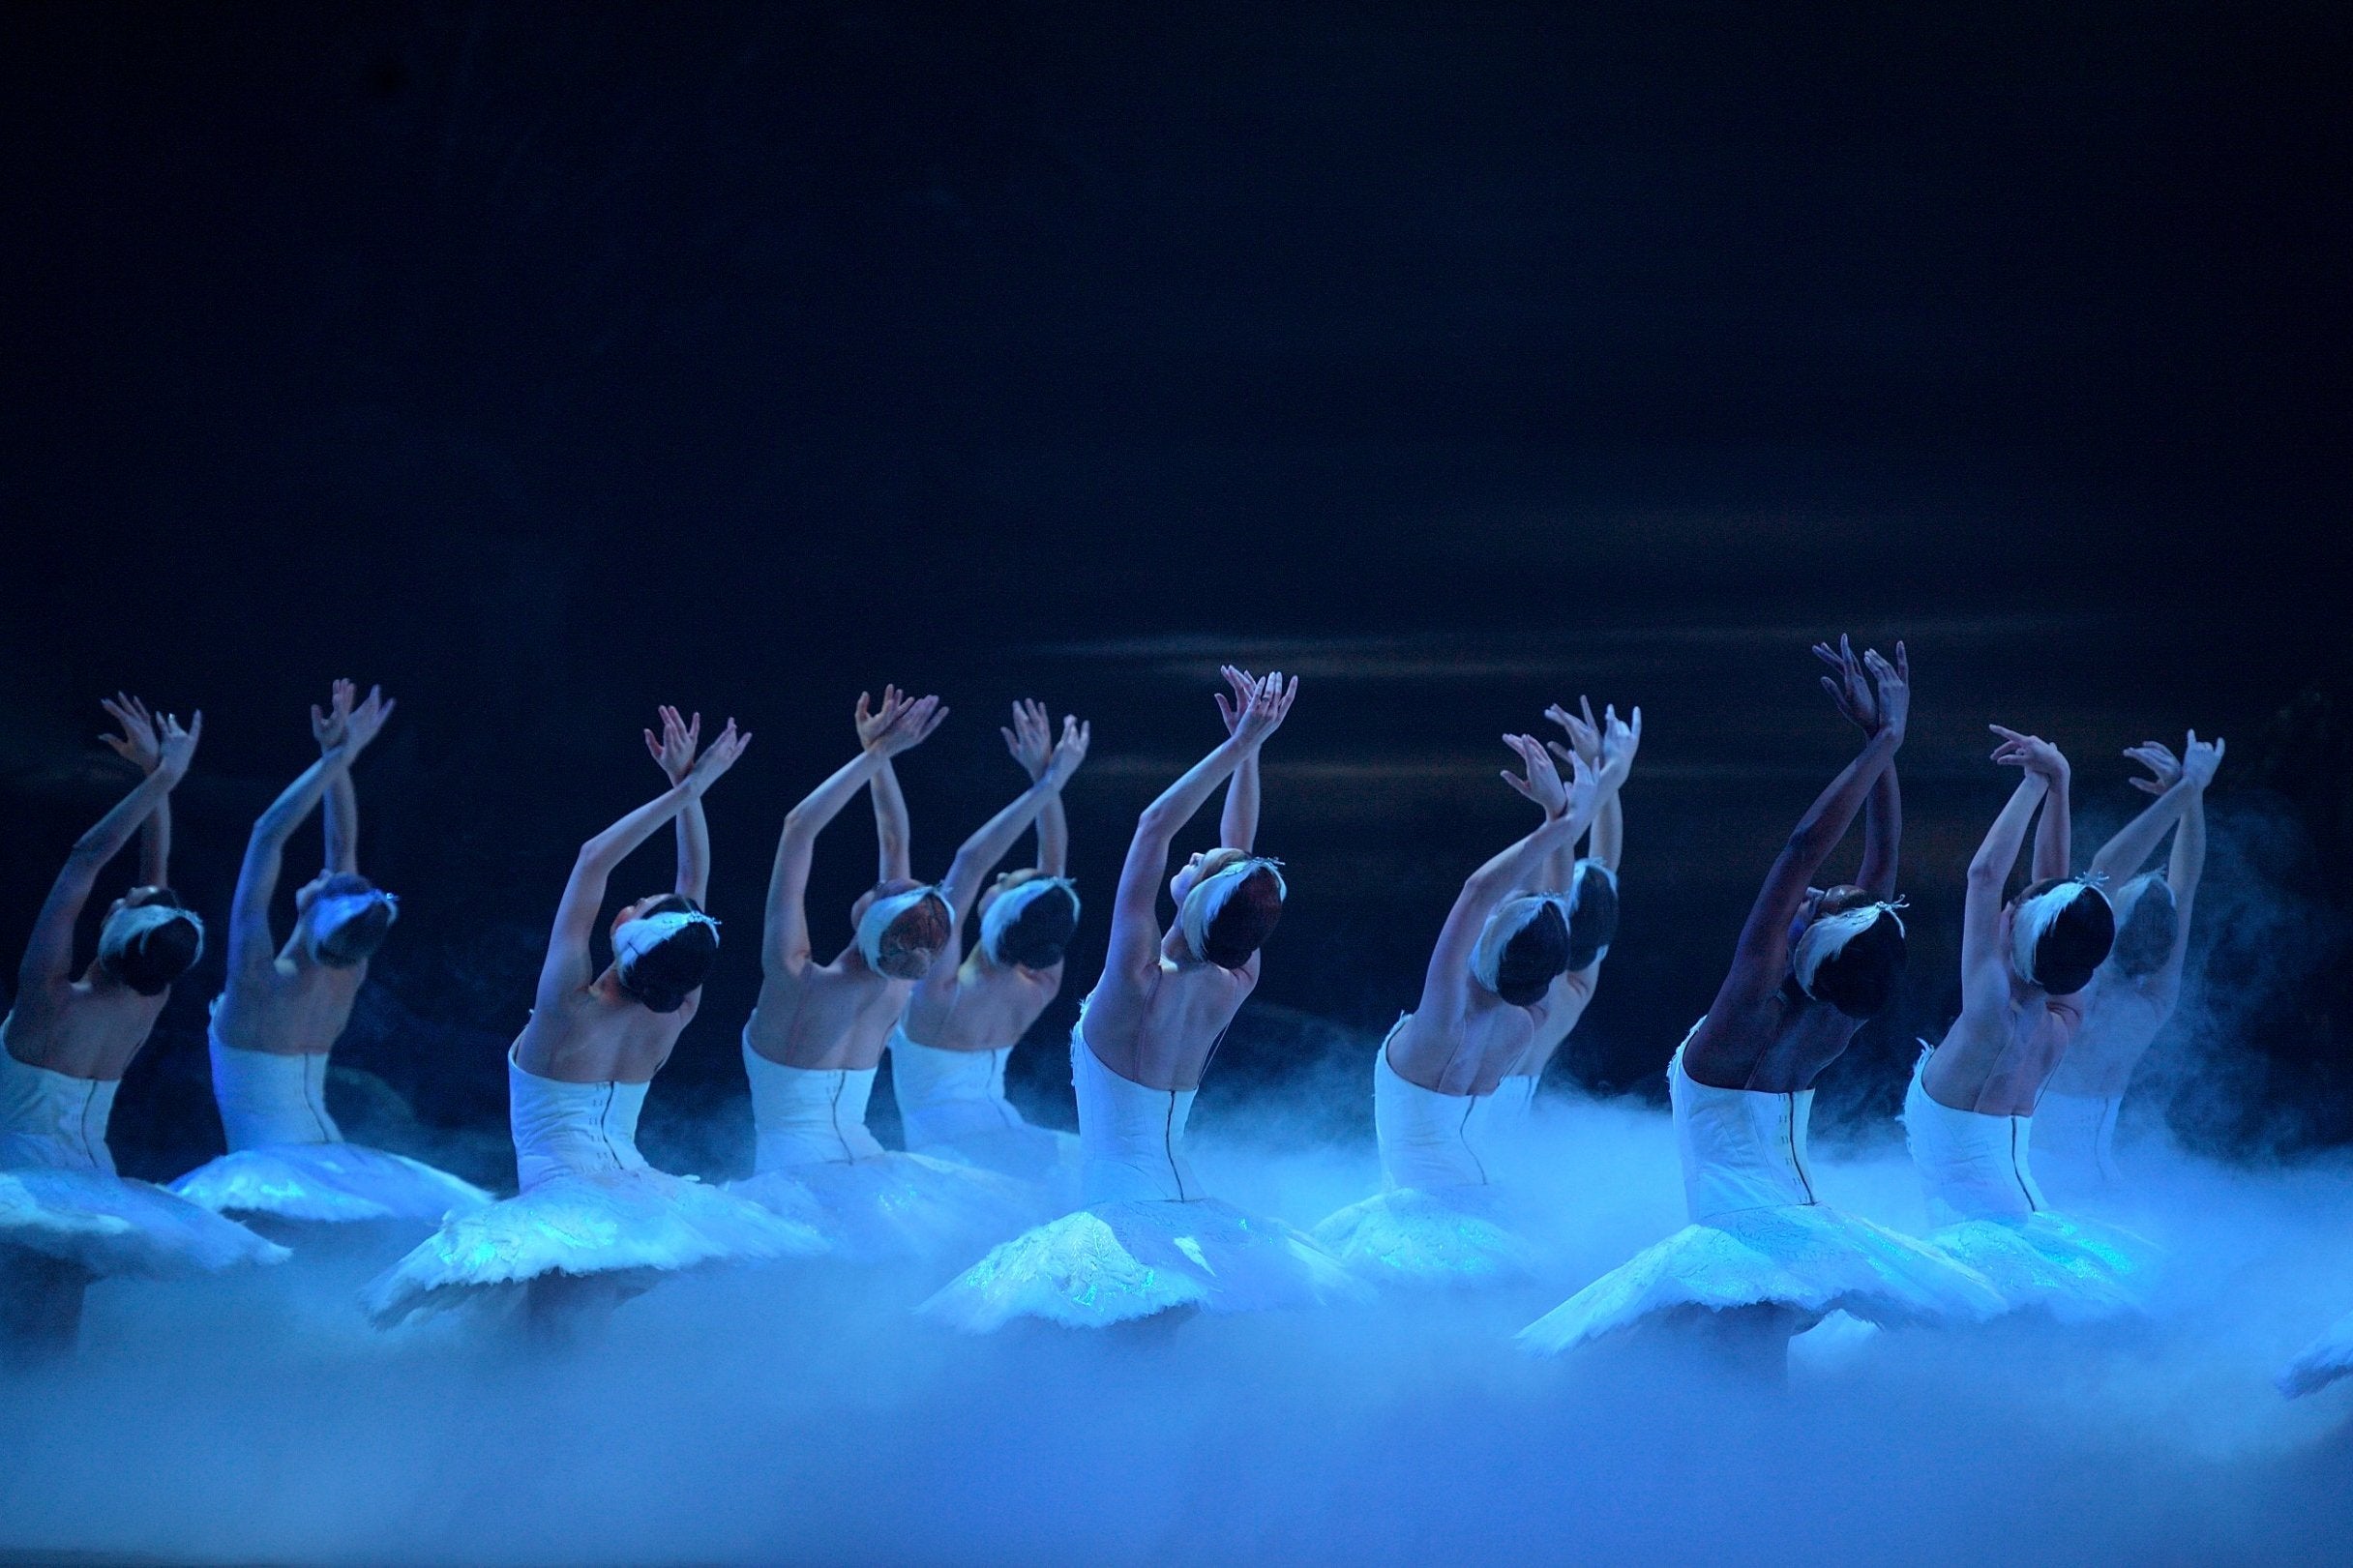 The English National Ballet performs a traditional staging of ‘Swan Lake’ with lively confidence